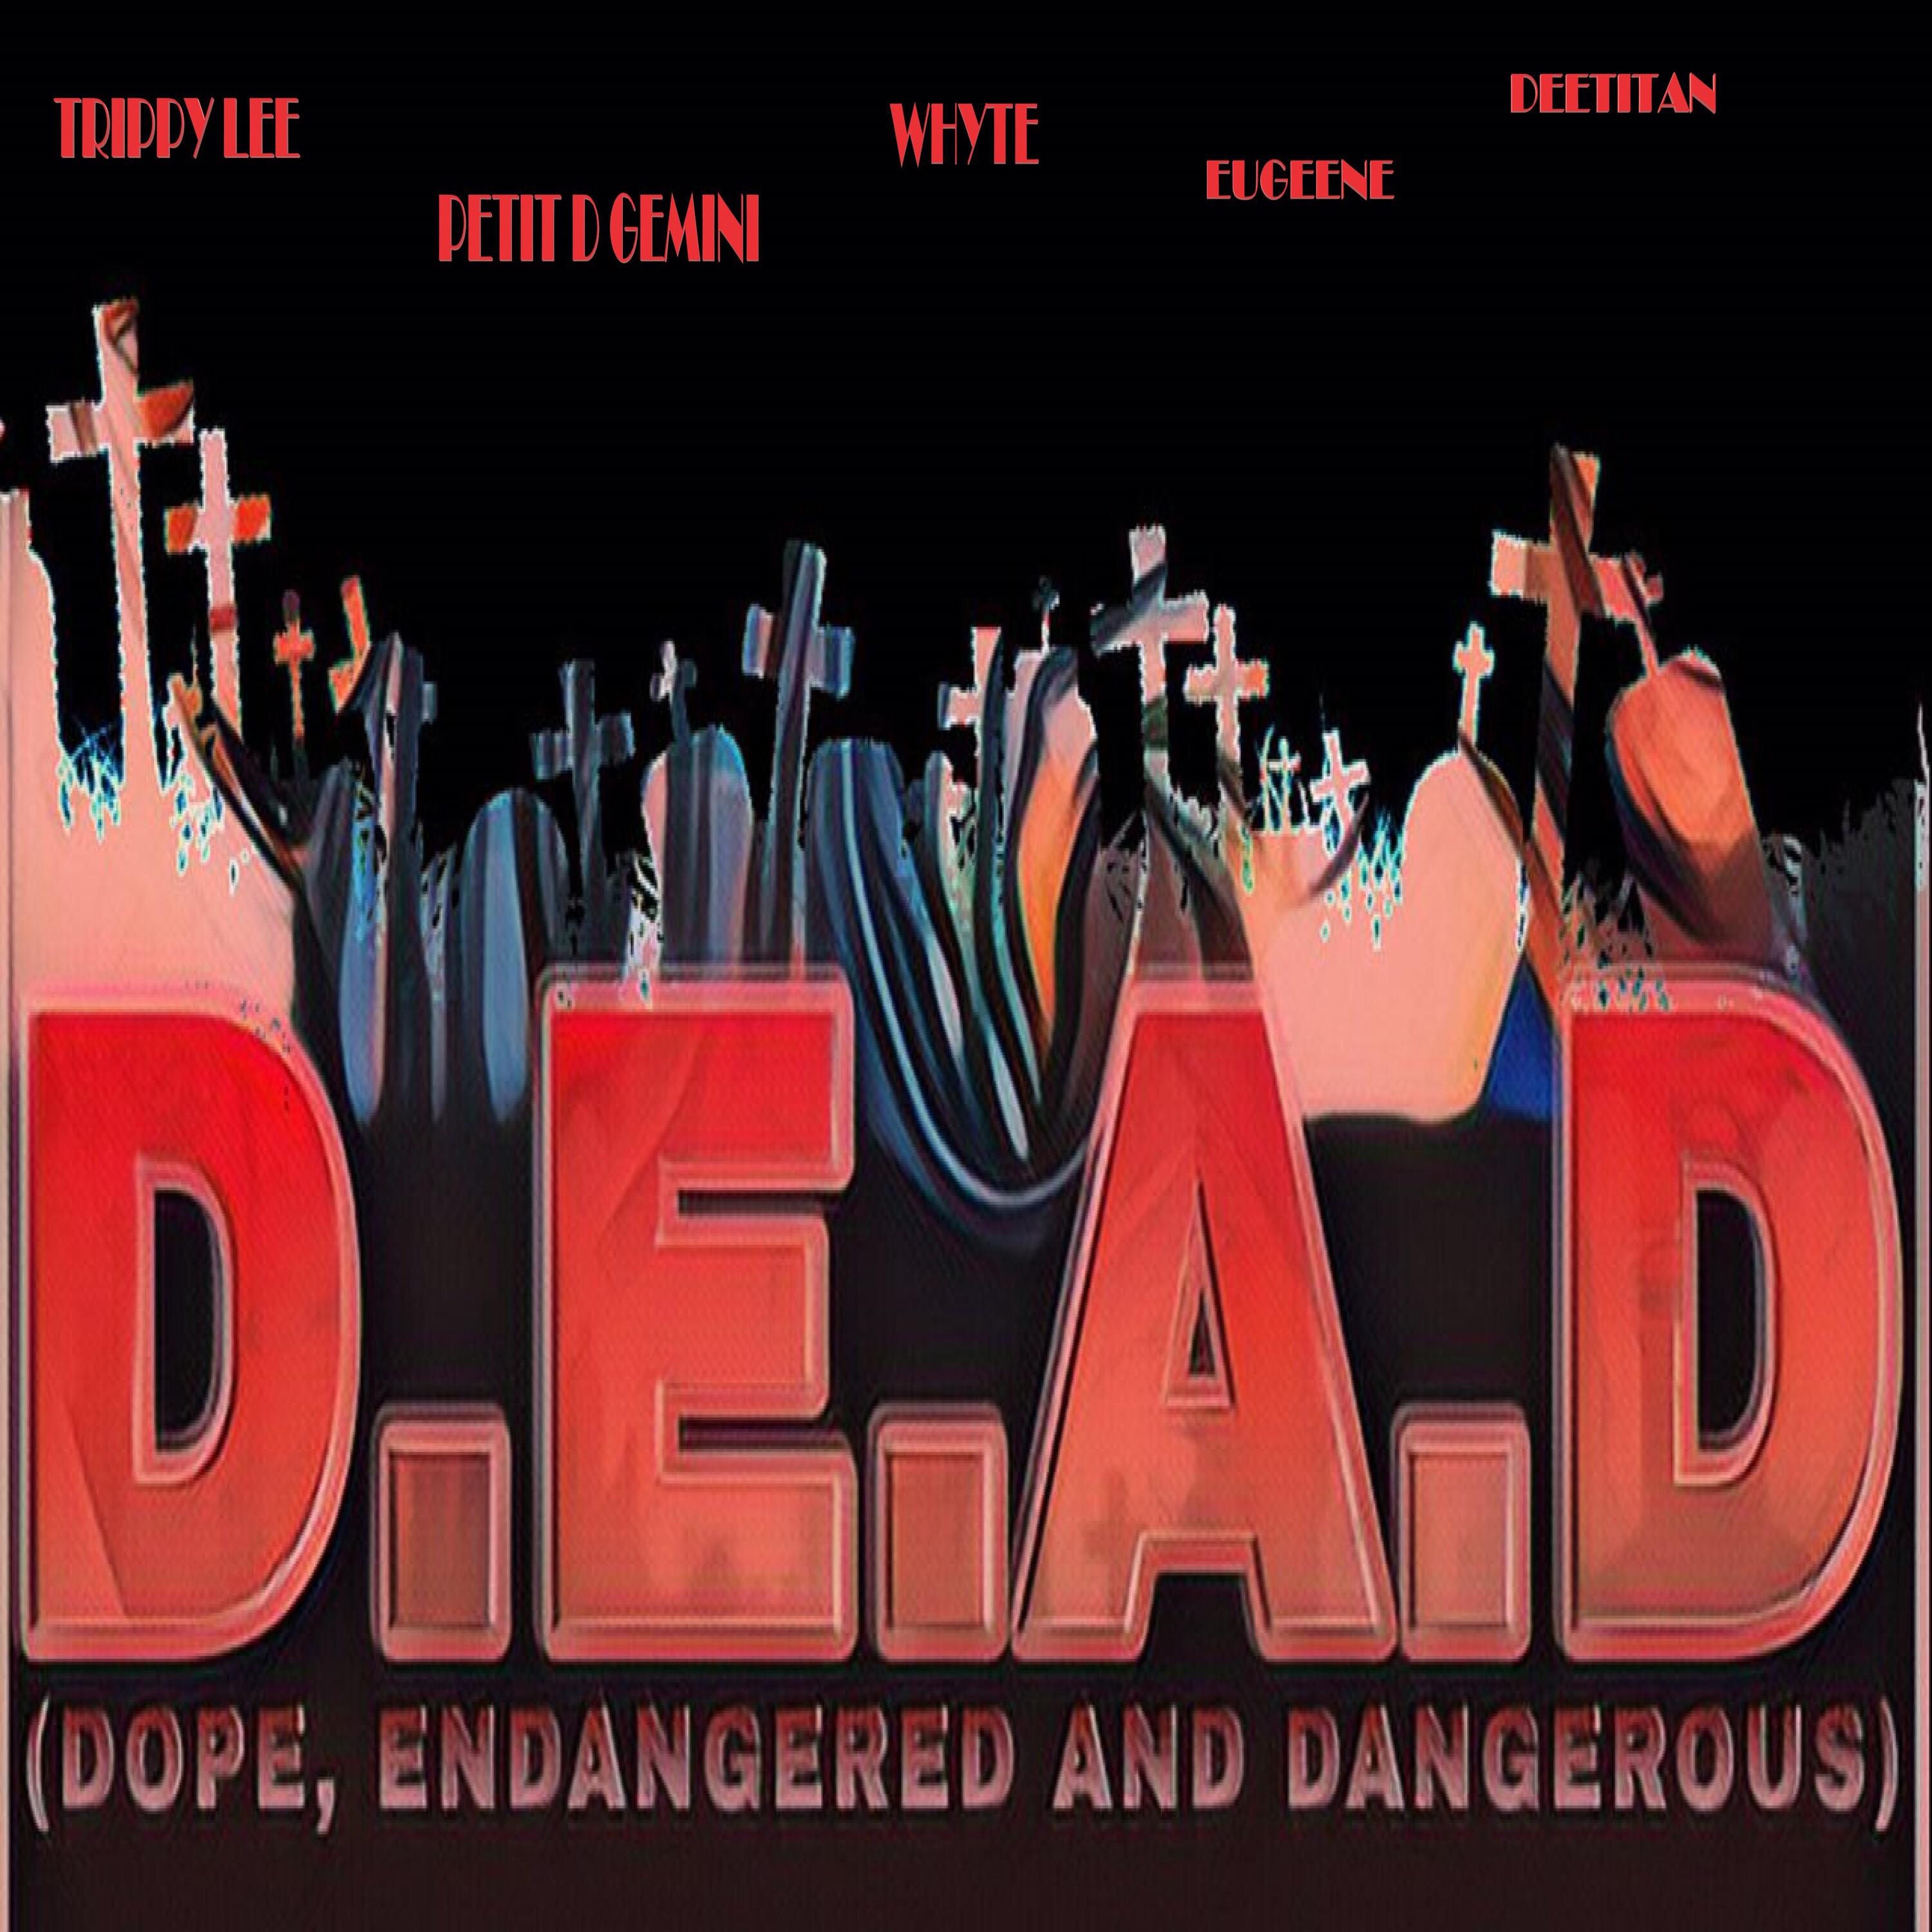 Trippy Lee - D.E.A.D (Dope, Endangered And Dangerous)